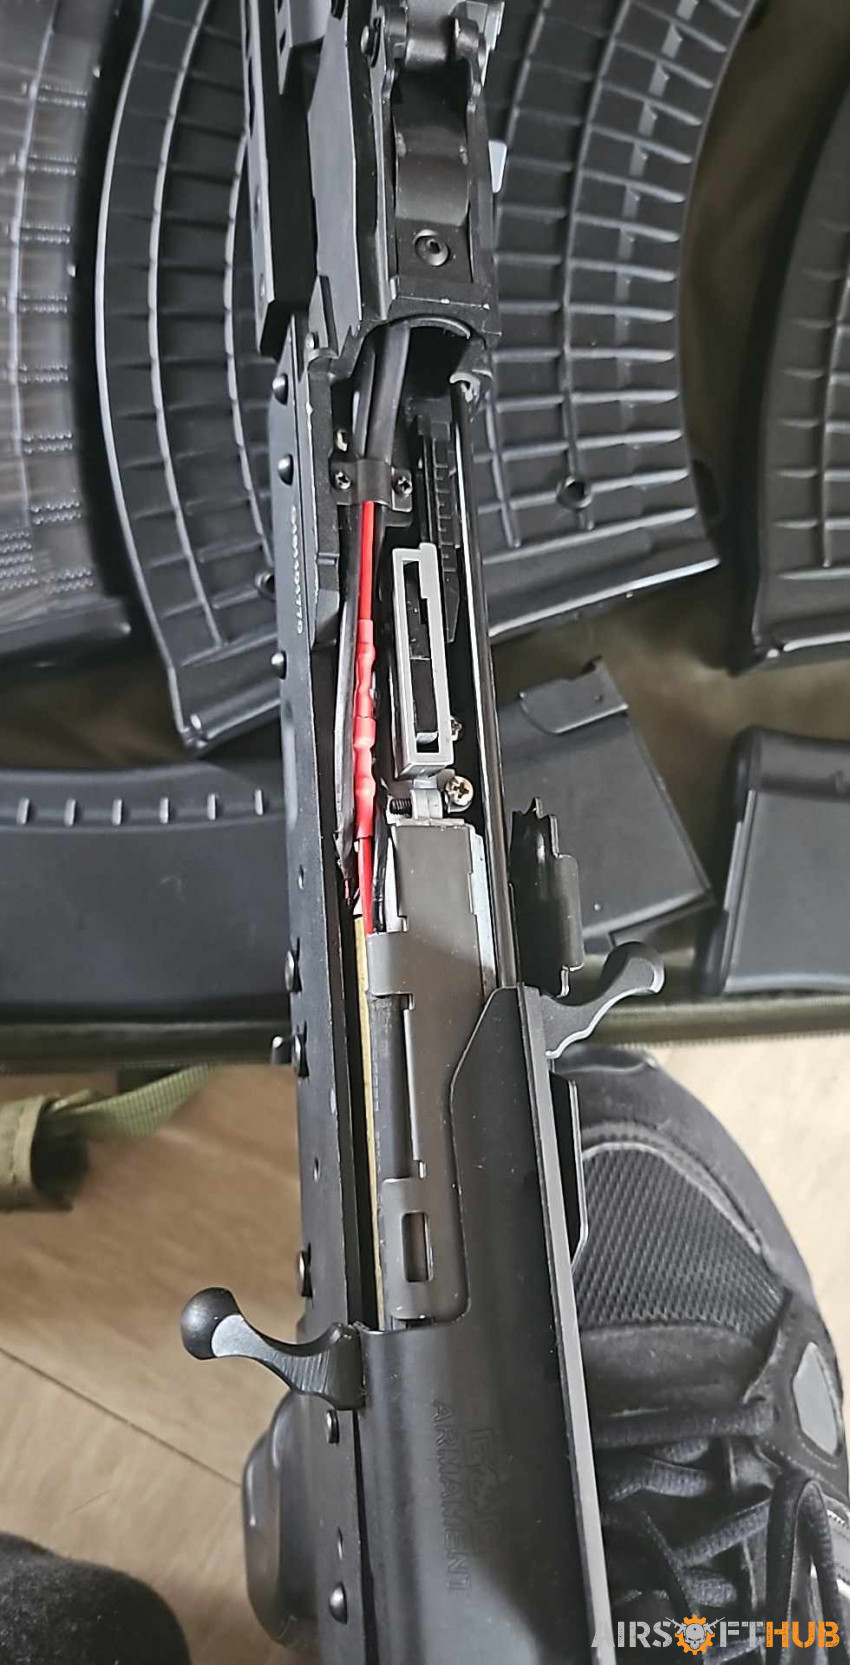 ak74 for sale magazines galore - Used airsoft equipment